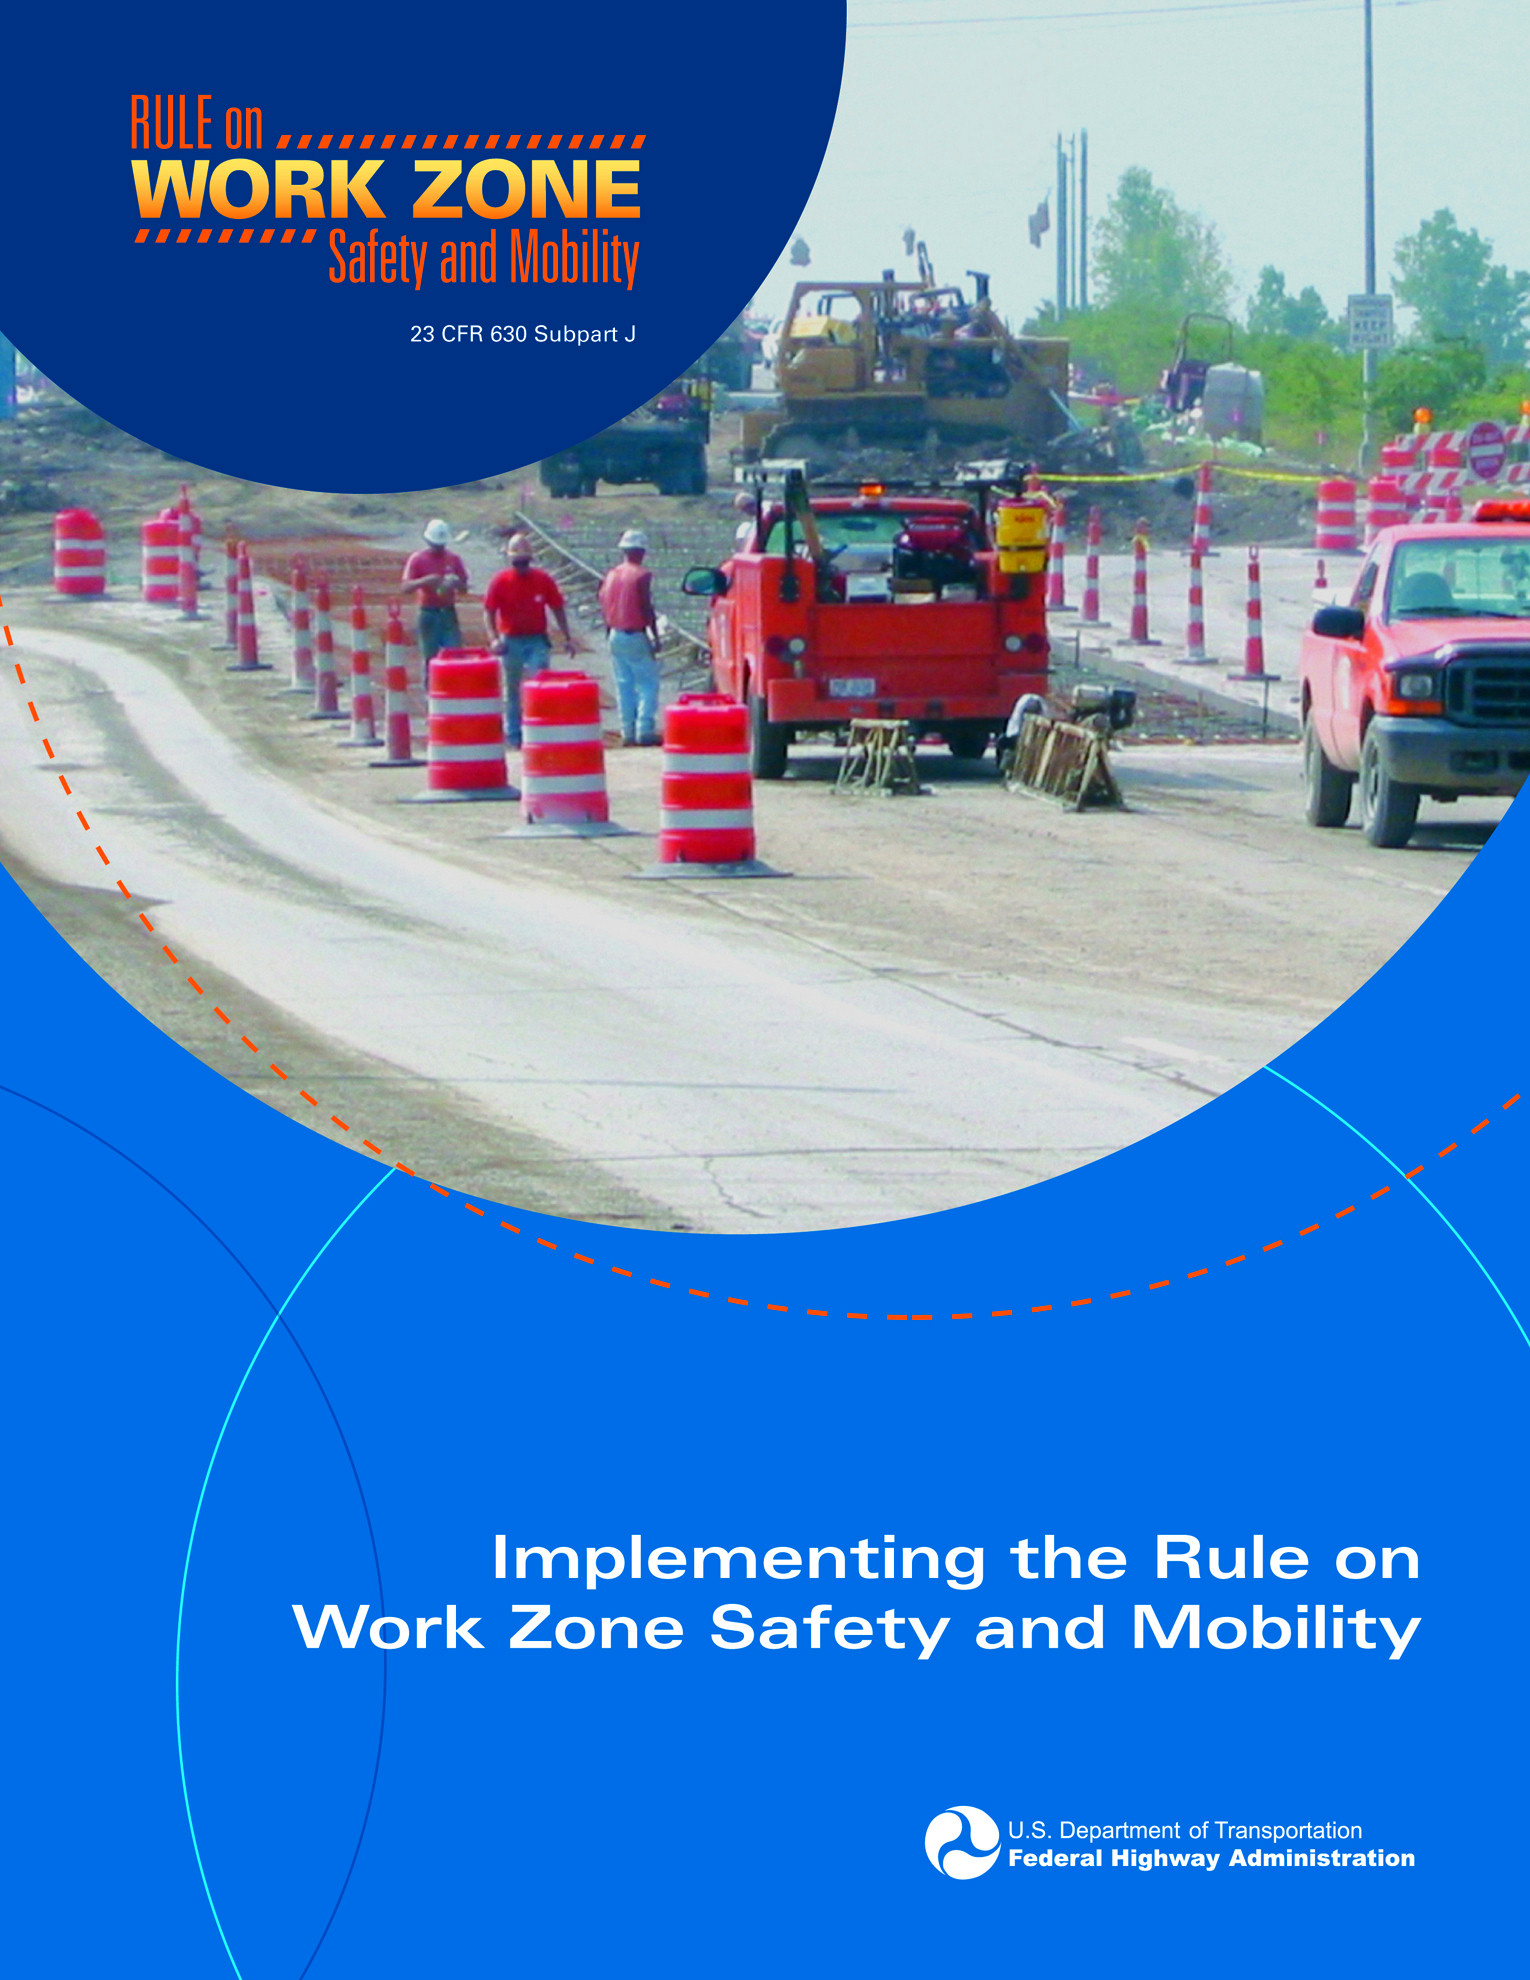 Cover image for the "Implementing the Final Rule on Work Zone Safety and Mobility" booklet, showing a photo of a road construction project along with the booklet title